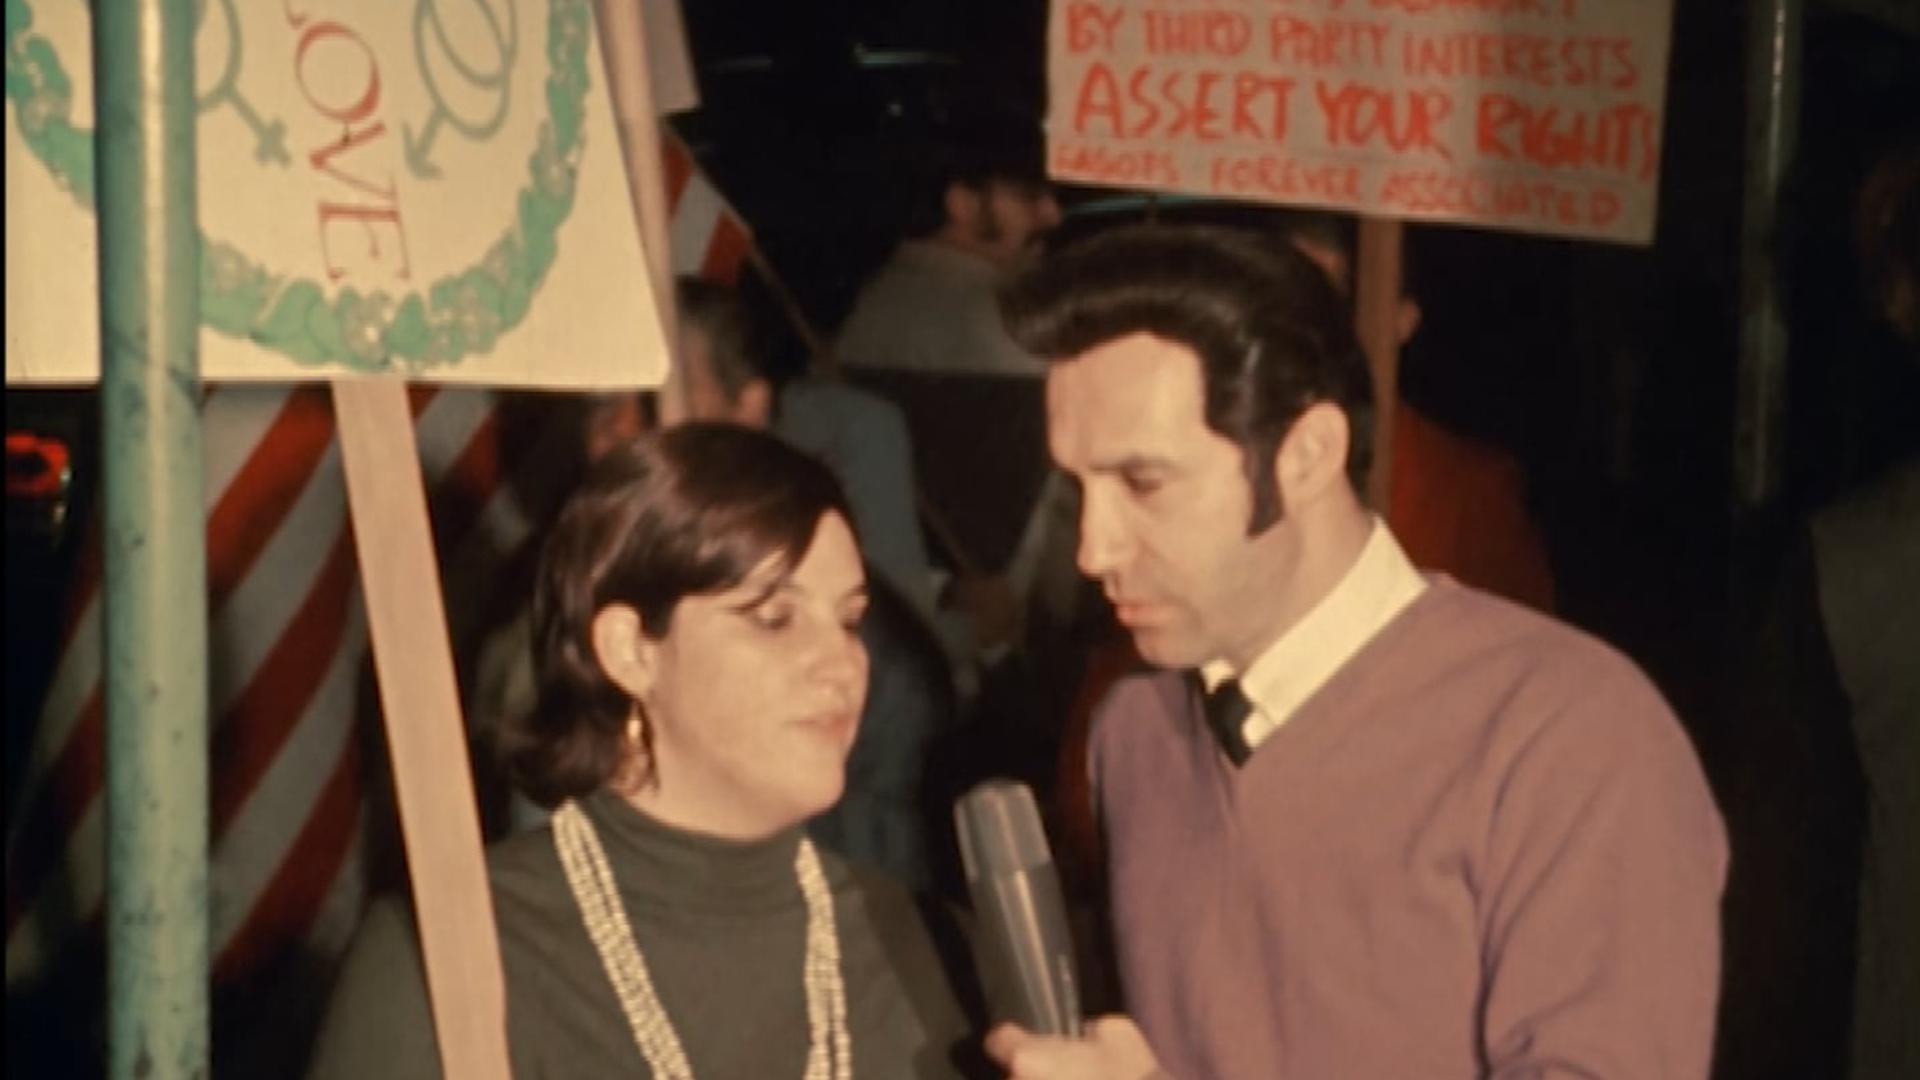 Sign of Protest (1970)